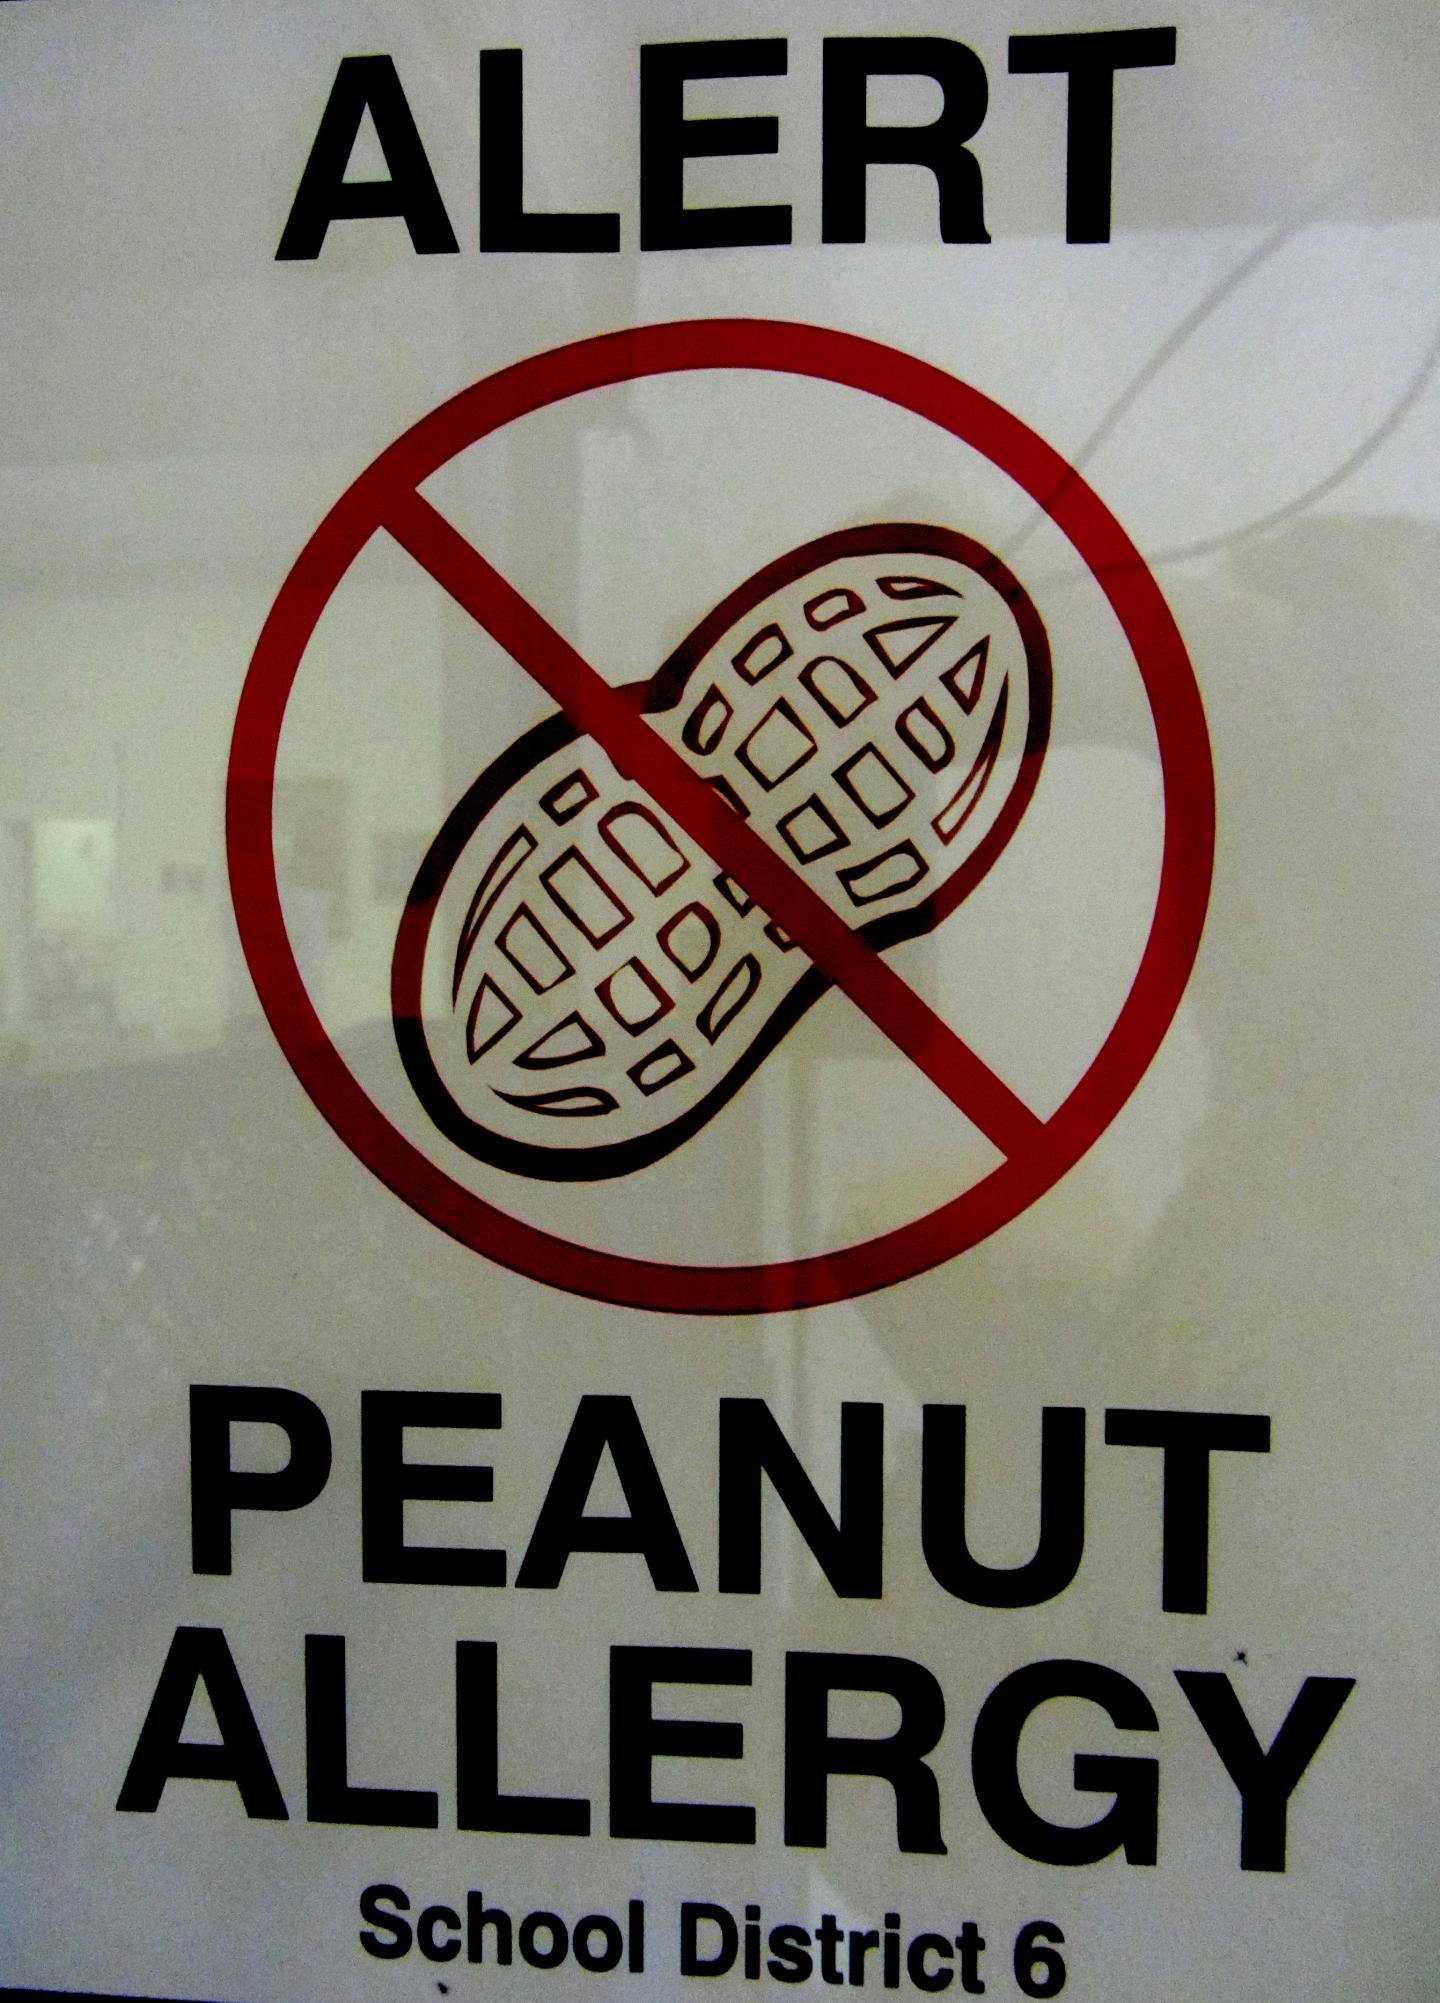 Peanut-Allergic Children are More at Risk of Exposure at Home than at School